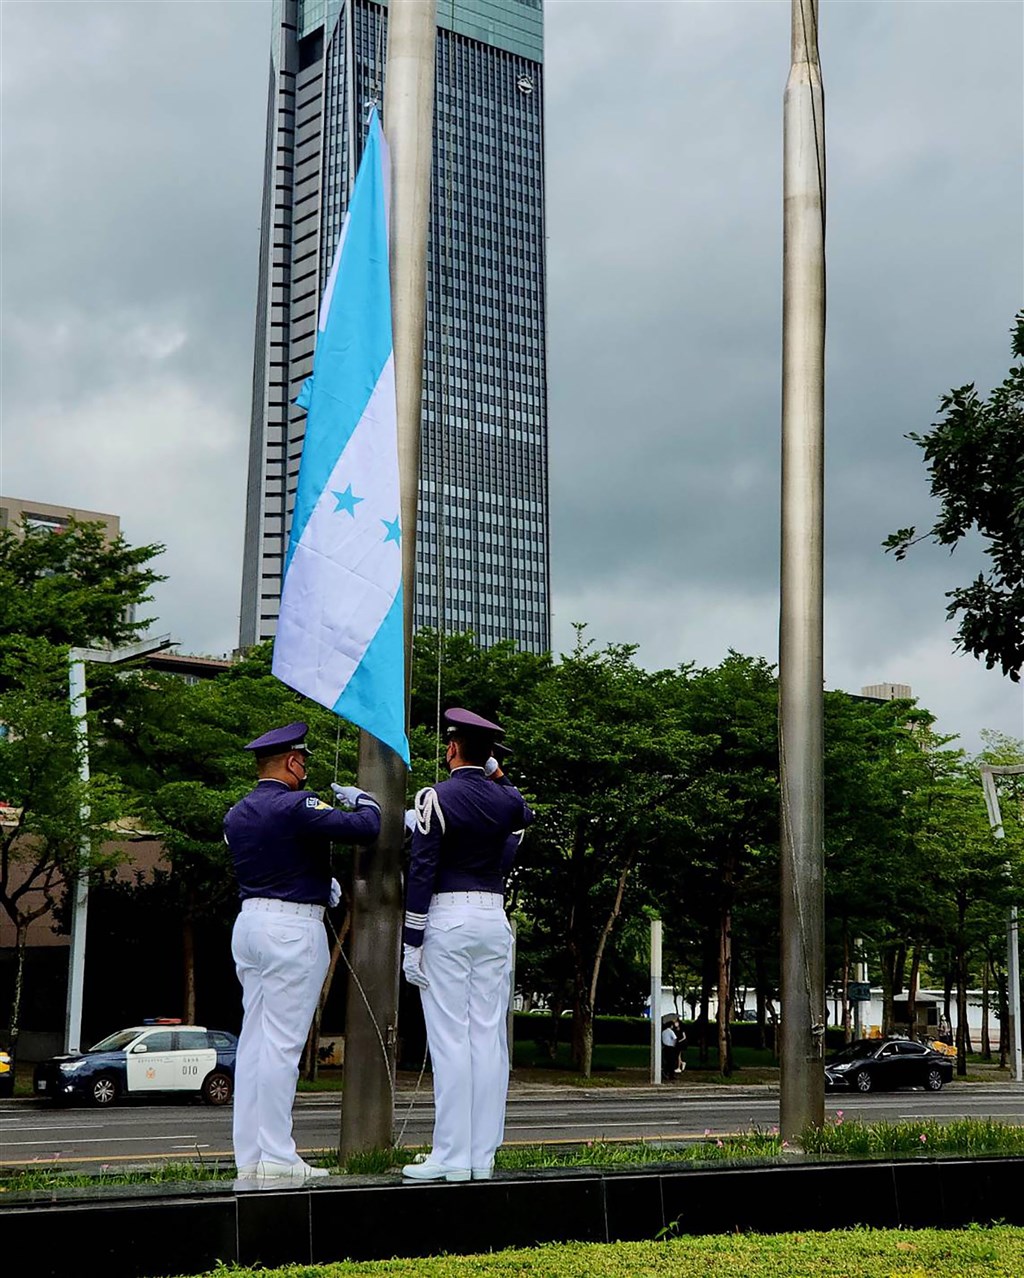 A flag raising ceremony is held in front of Taipei City Hall on Sept. 1, 2022 by the Honduran embassy in Taiwan to mark the Central American country